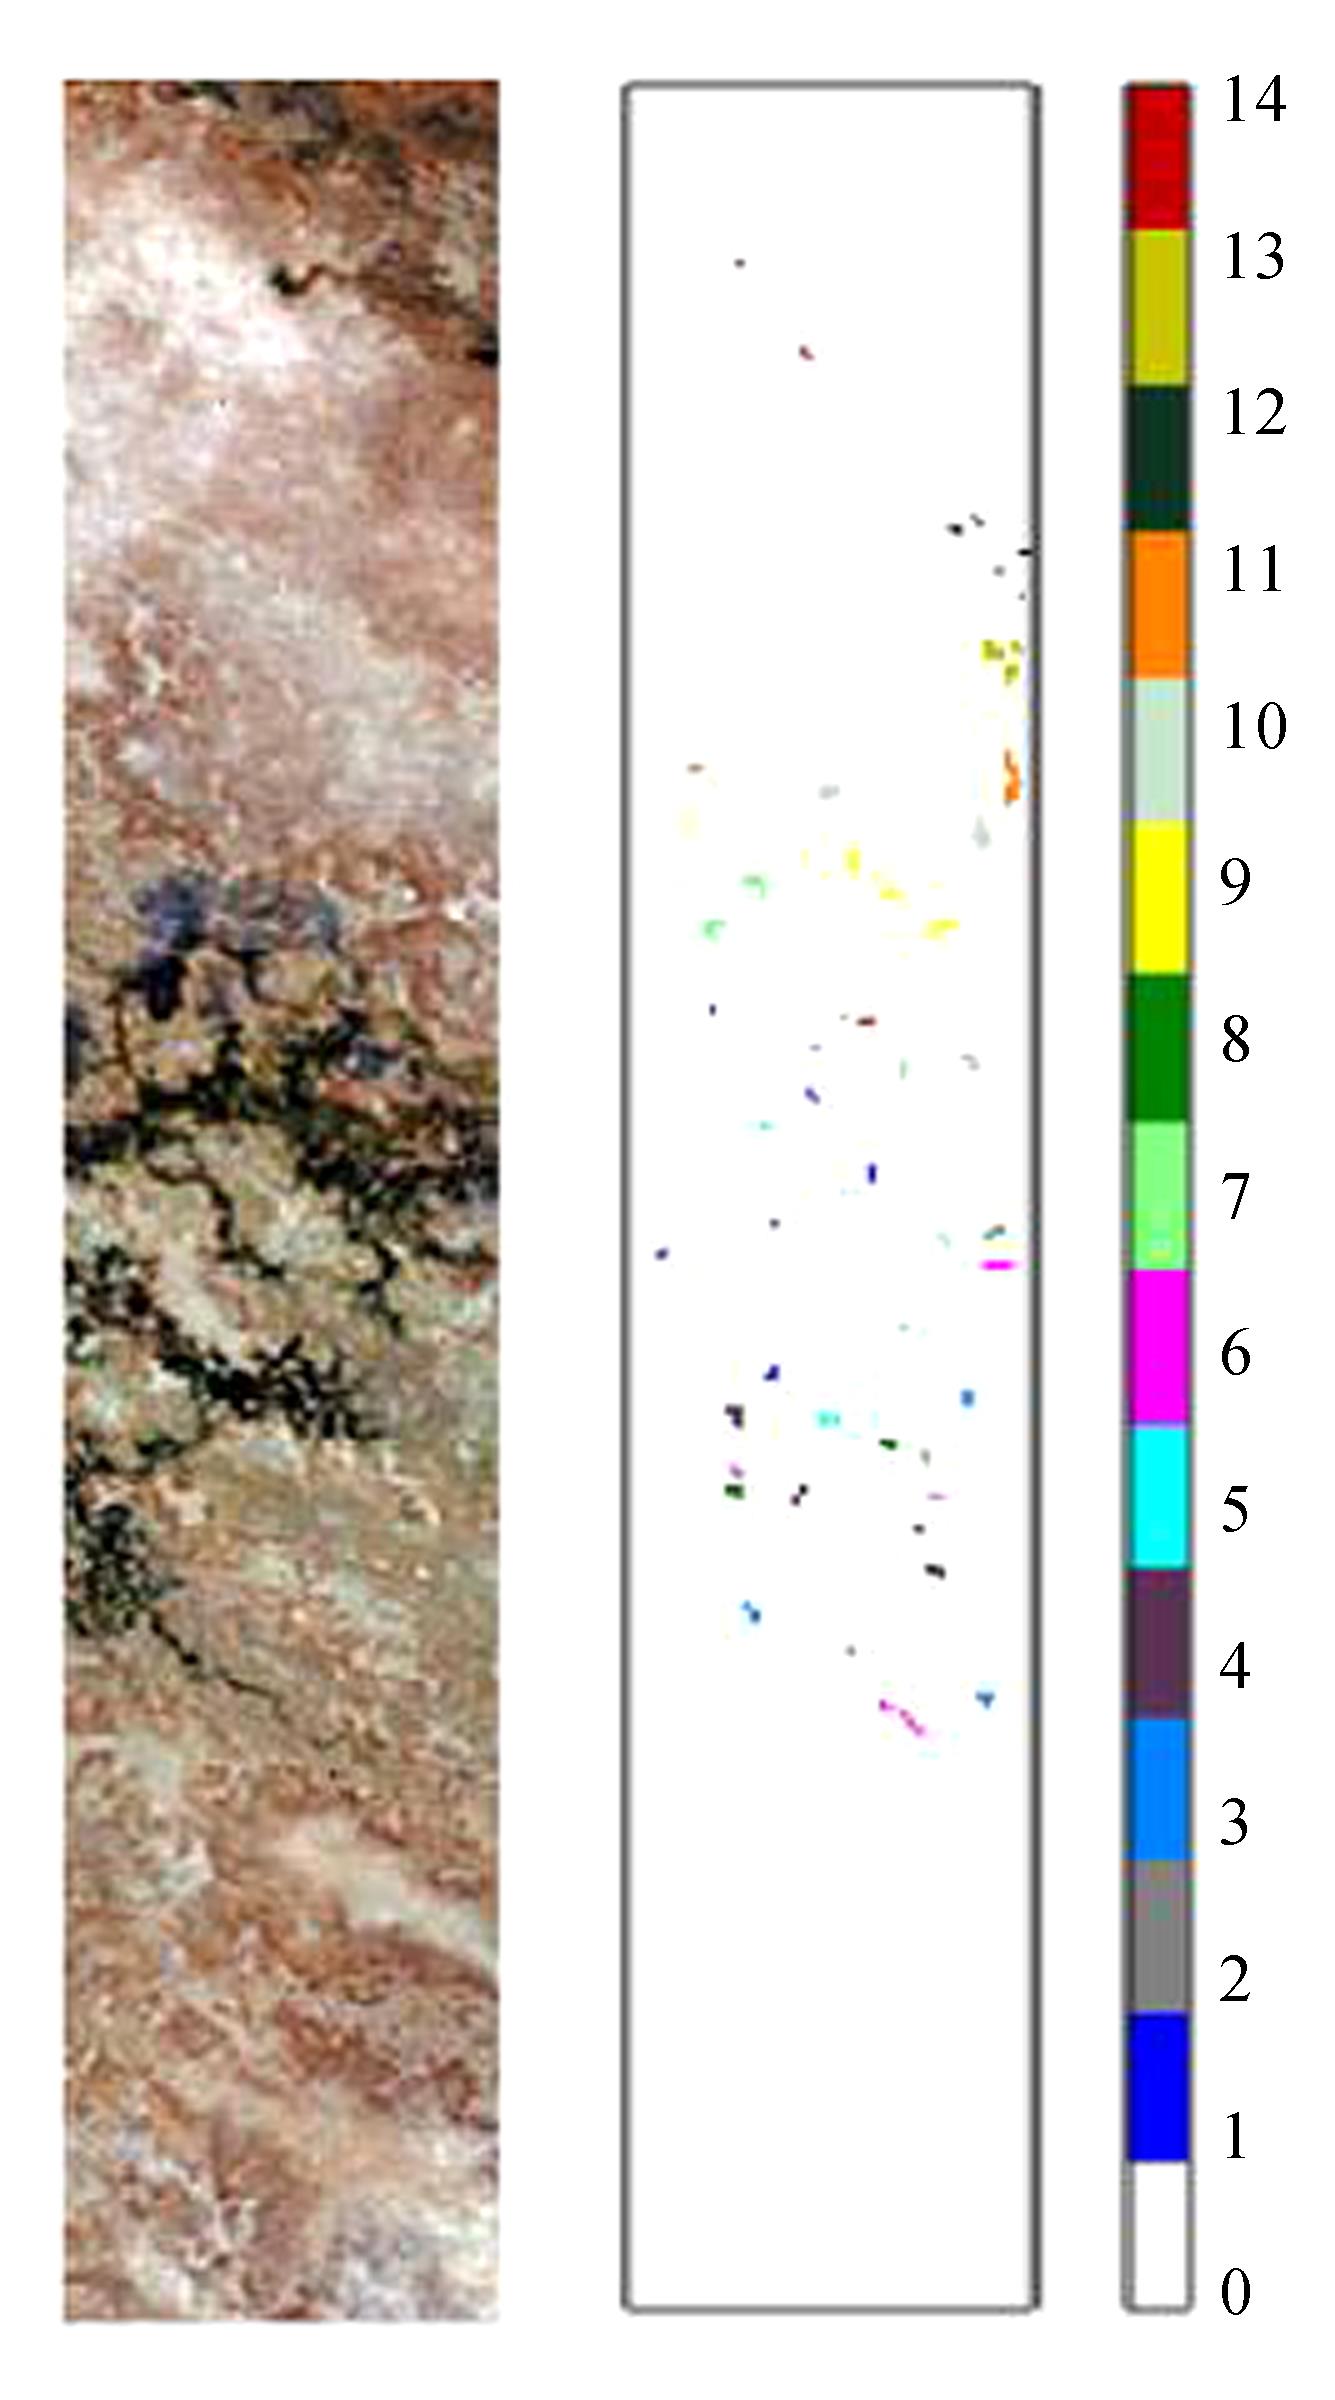 Hyperspectral Botswana image and its reference map